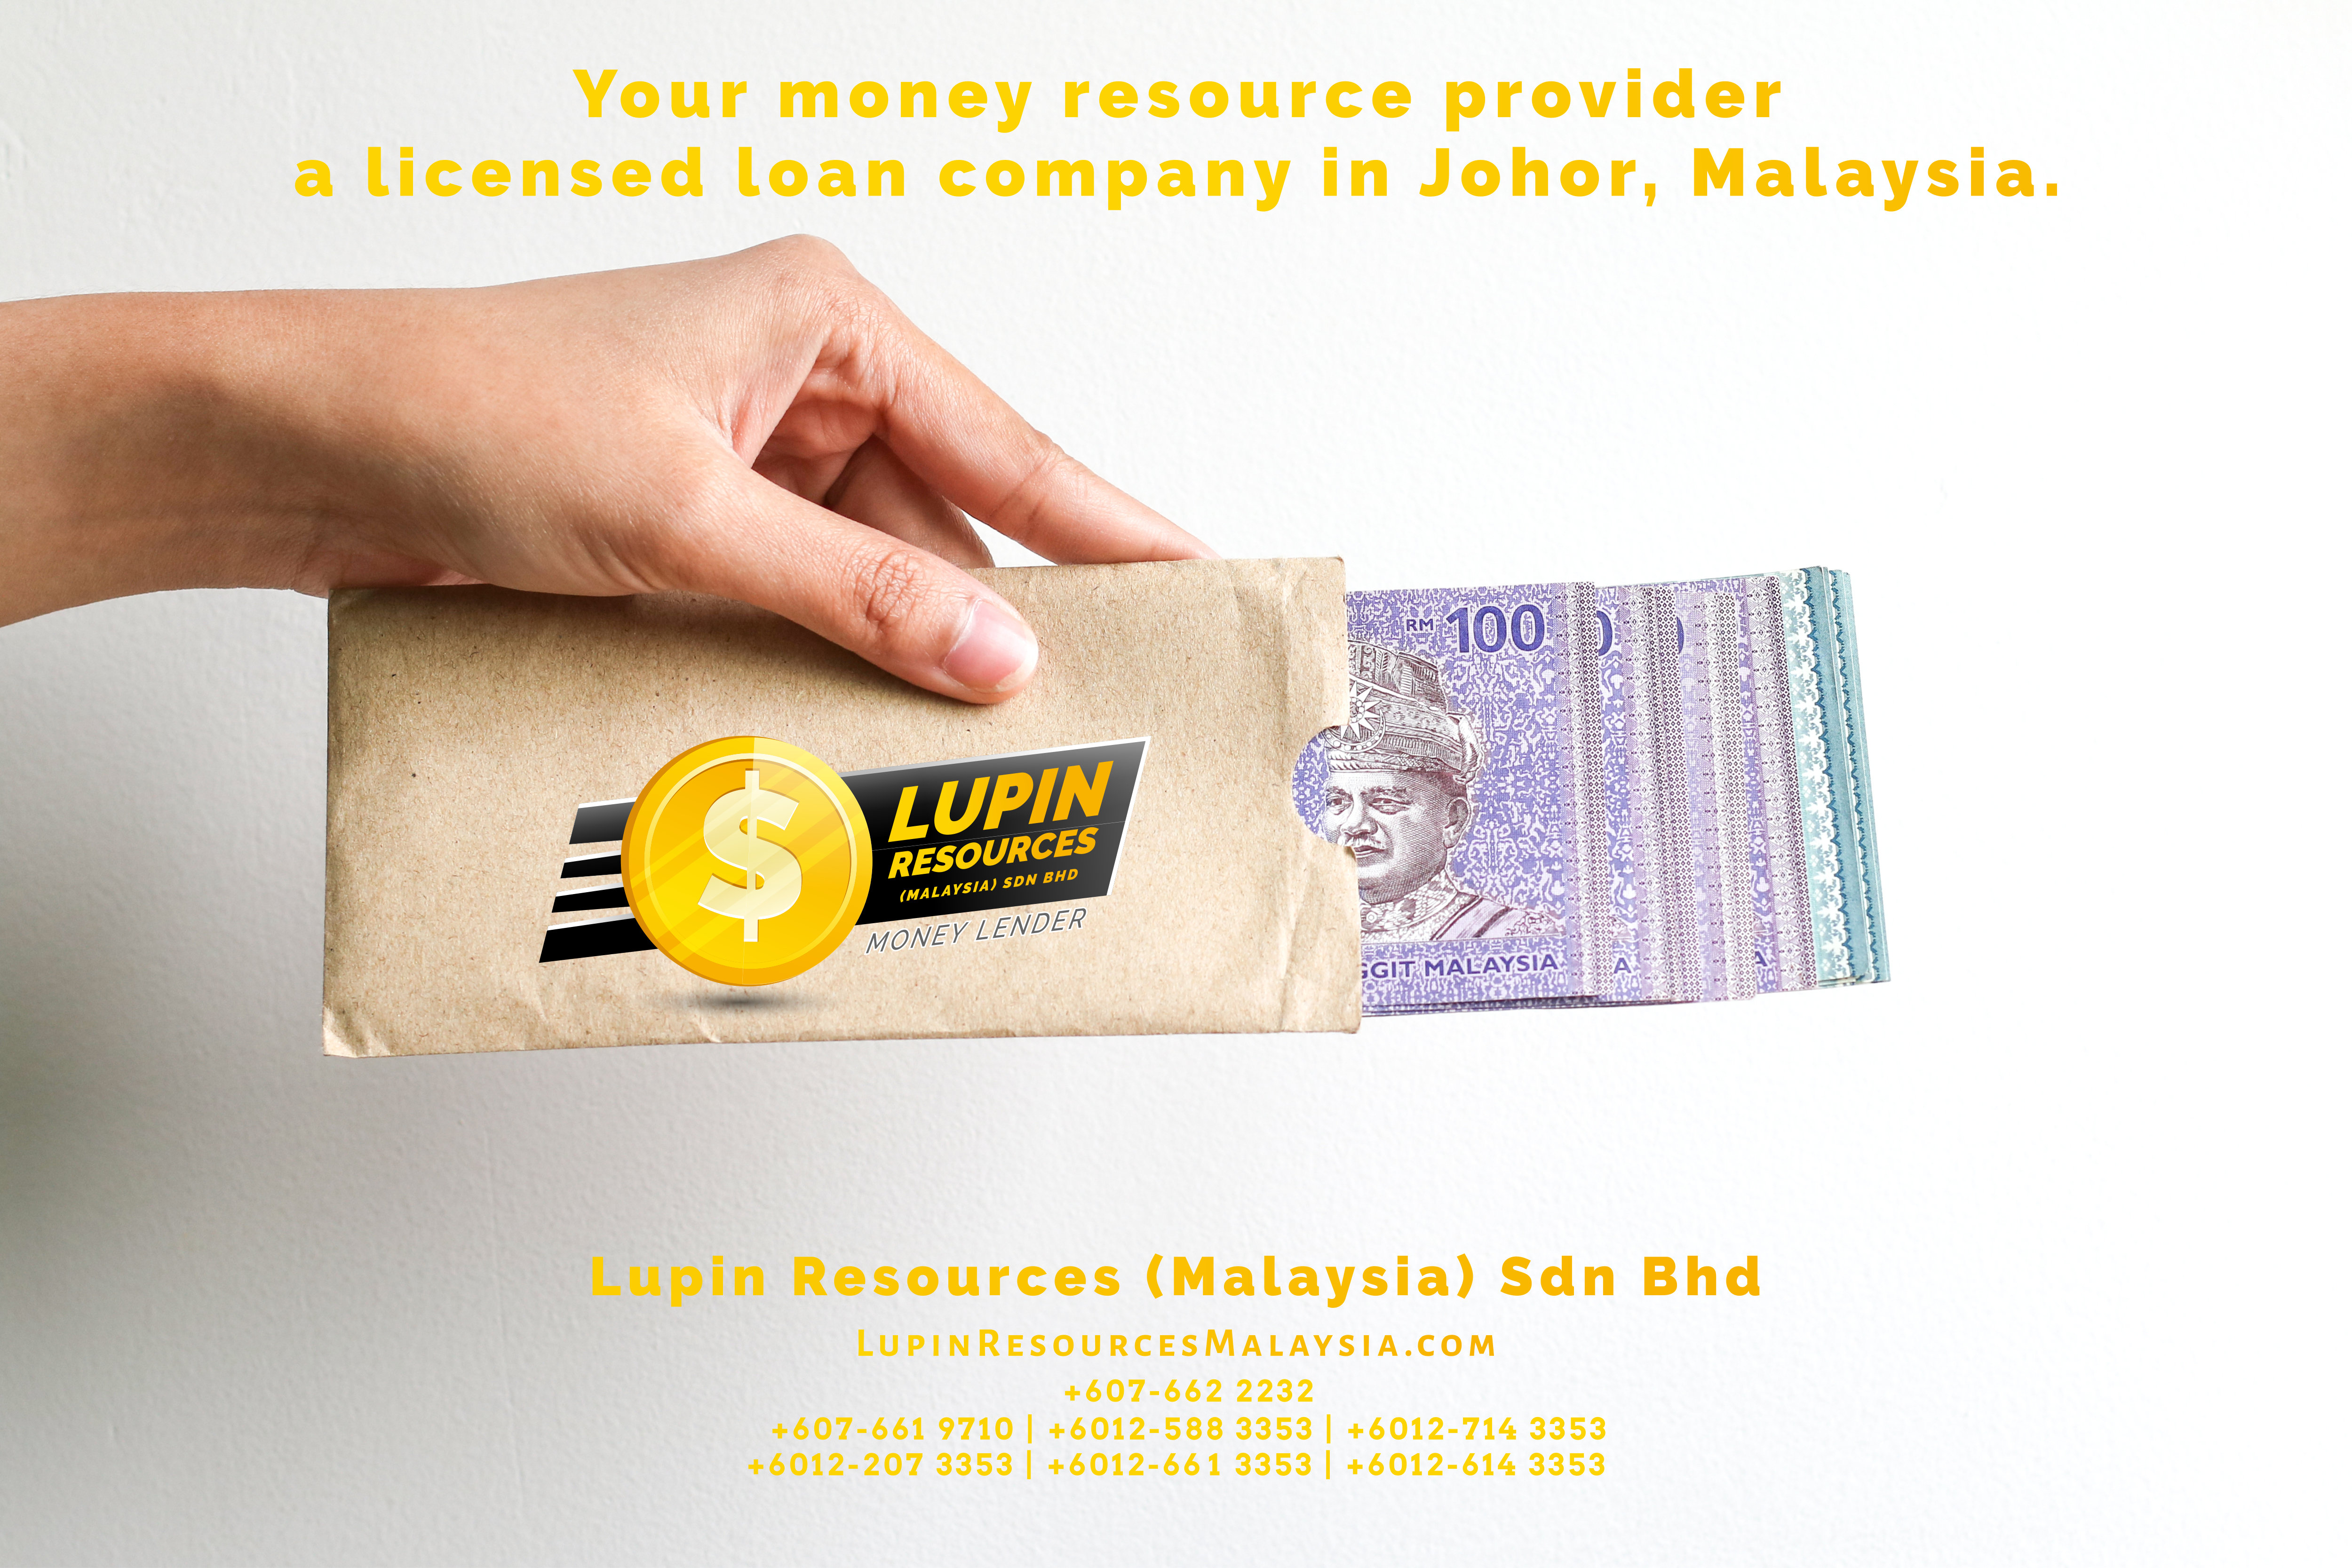 Johor Licensed Loan Company Licensed Money Lender Lupin Resources Malaysia SDN BHD Your money resource provider Kulai Johor Bahru Johor Malaysia Business Loan A01-77